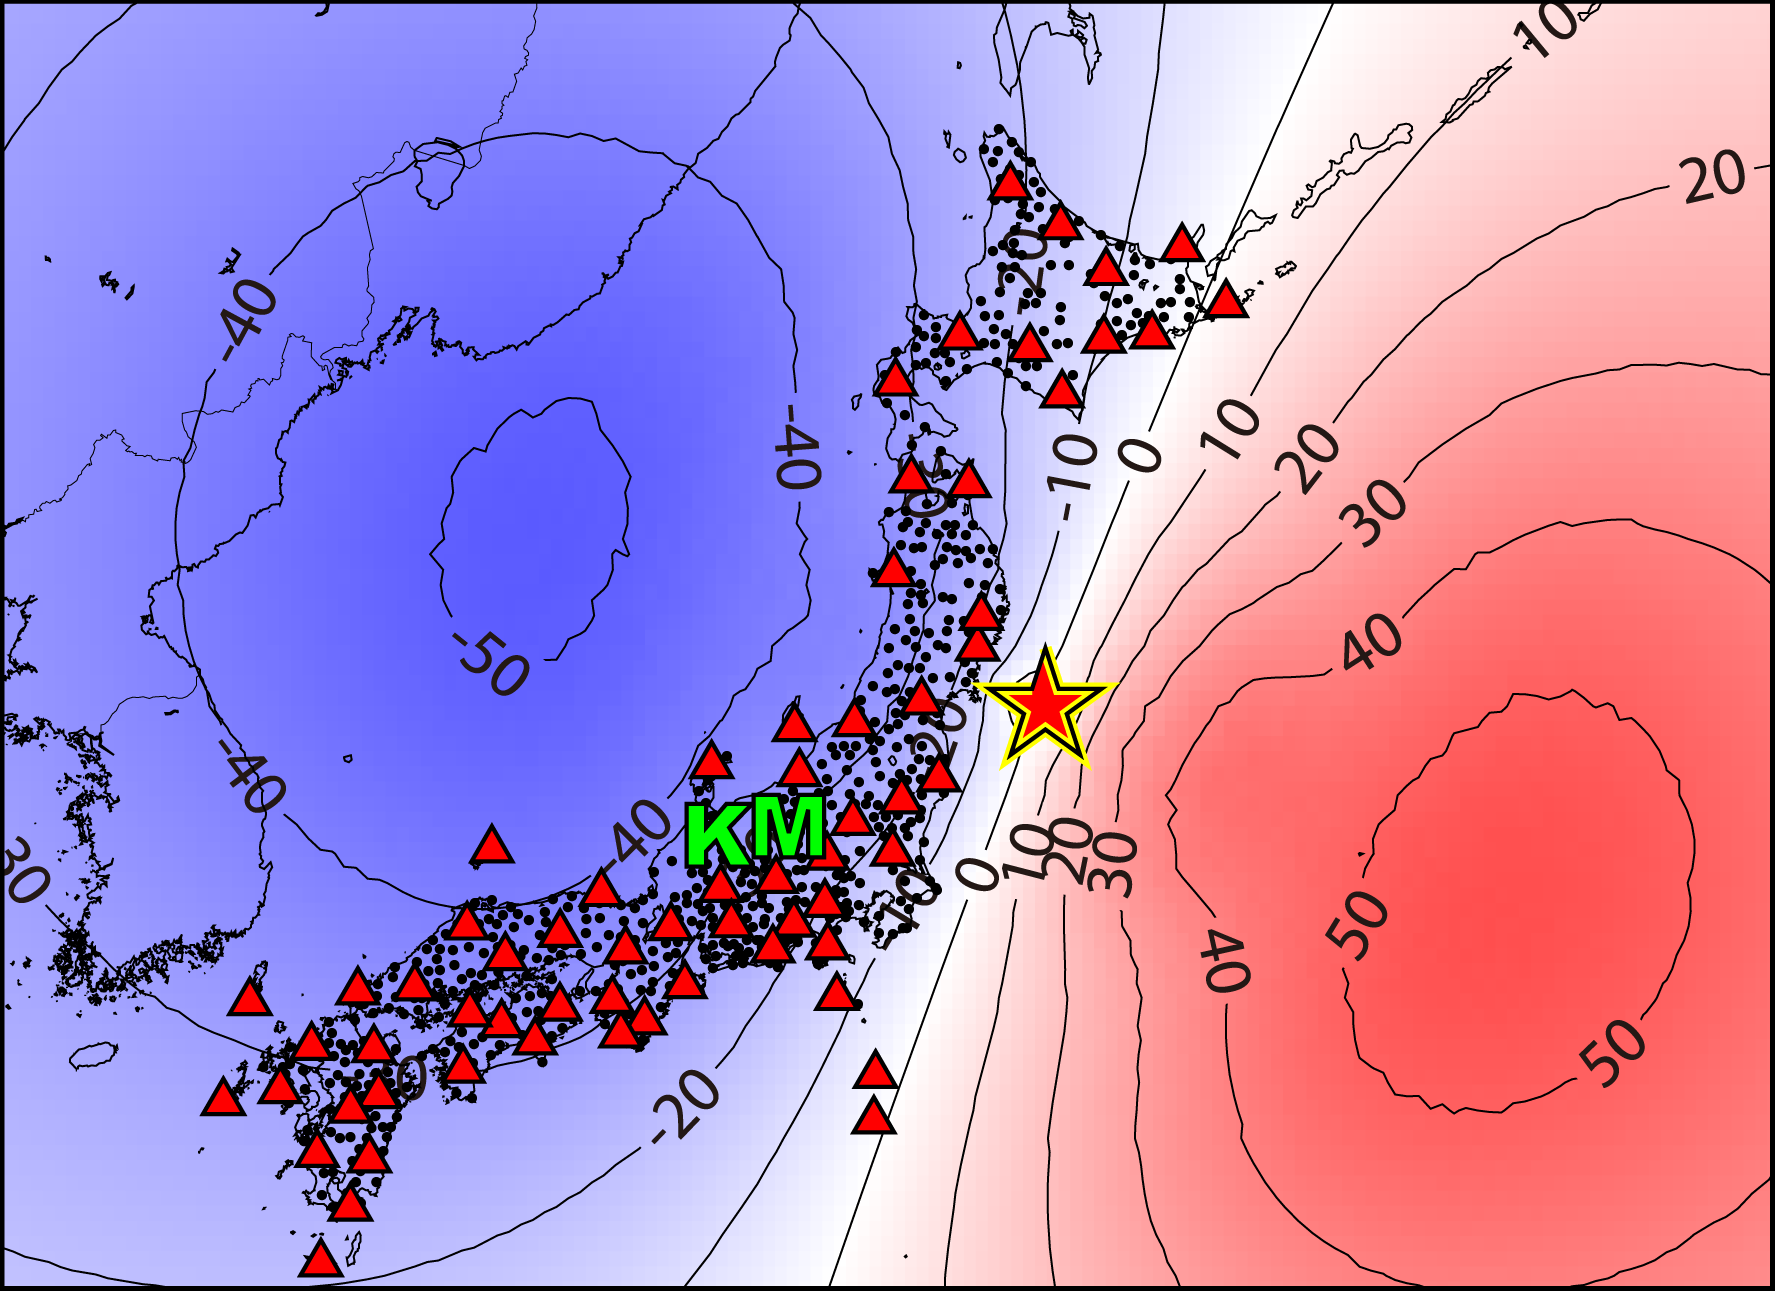 A map of Japan covered in triangles and dots with the letters K and M on it and a star over the earthquakes epicentre